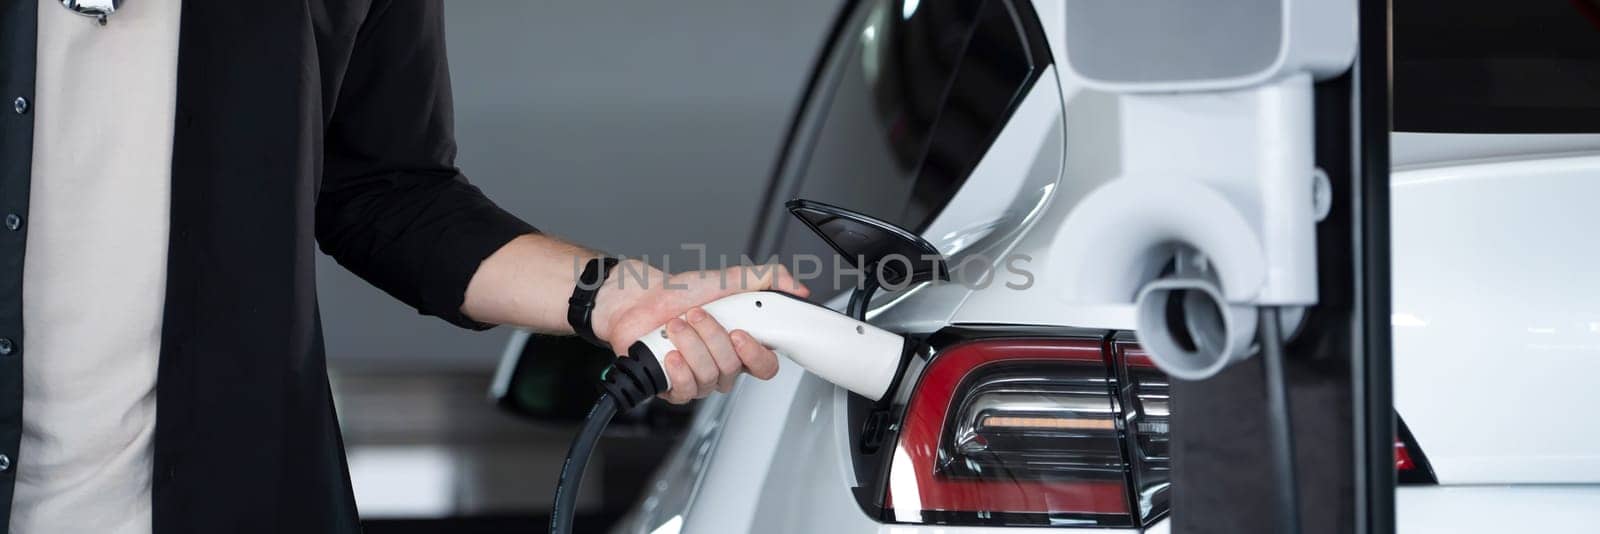 Young man travel with EV electric car to shopping center parking lot charging in downtown city showing urban sustainability lifestyle by green clean rechargeable energy of electric vehicle innards